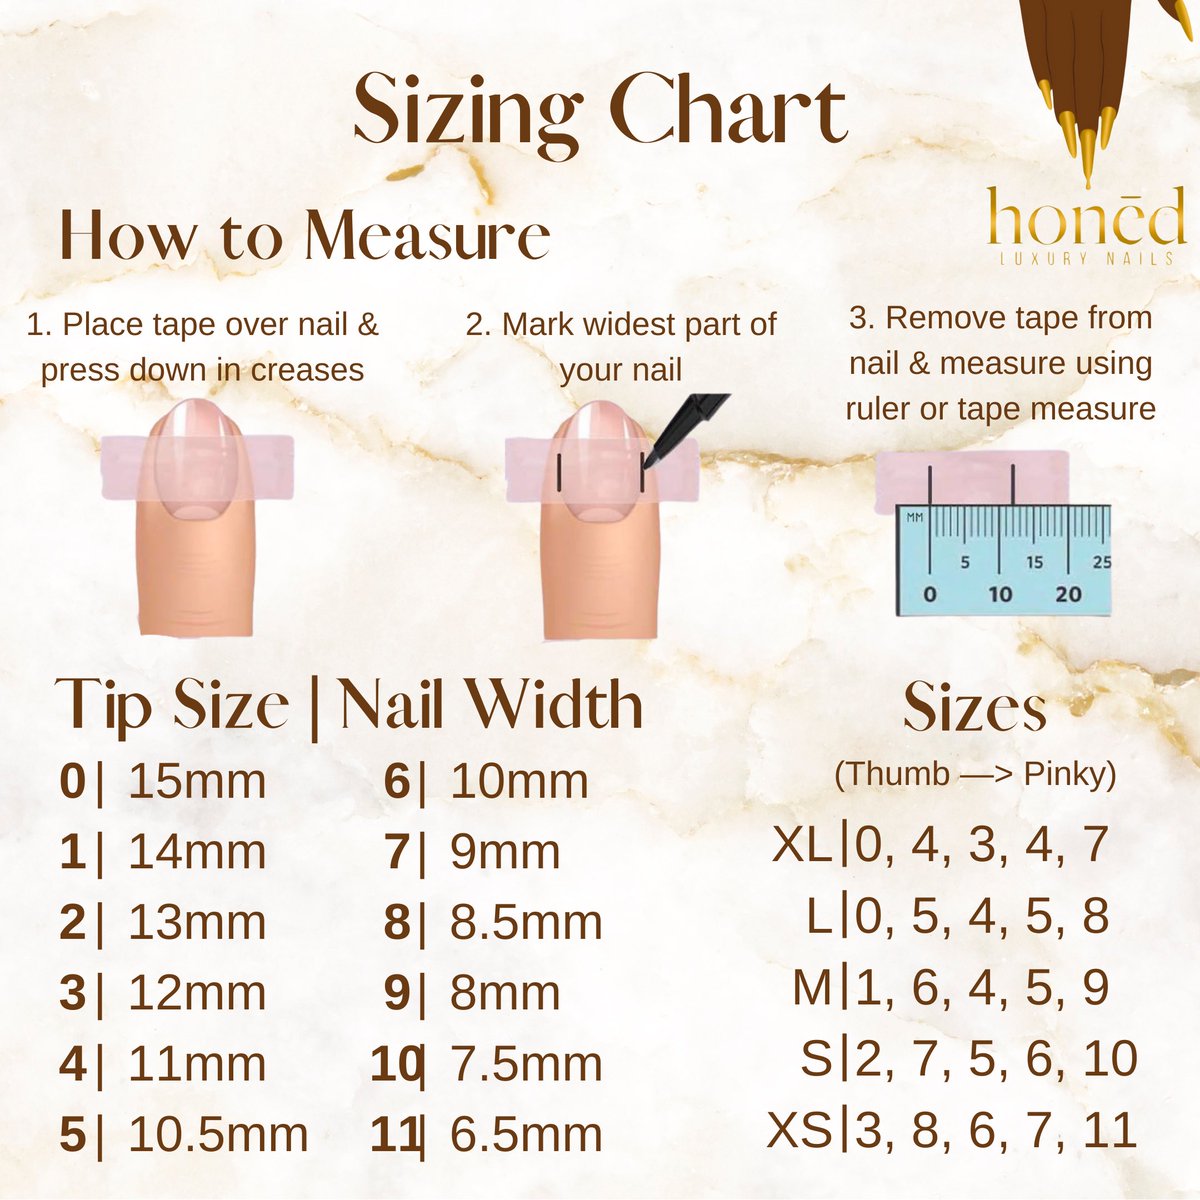 Sizing Chart 💅🏽🤎 Larger nails? No problem! We offer nail sizes up to 15mm. The standard press on set only goes up to 13mm. I’ve personally had issues with pressons fitting my nails properly, ESPECIALLY my thumbs! Honēd has solved that problem 🫶🏽